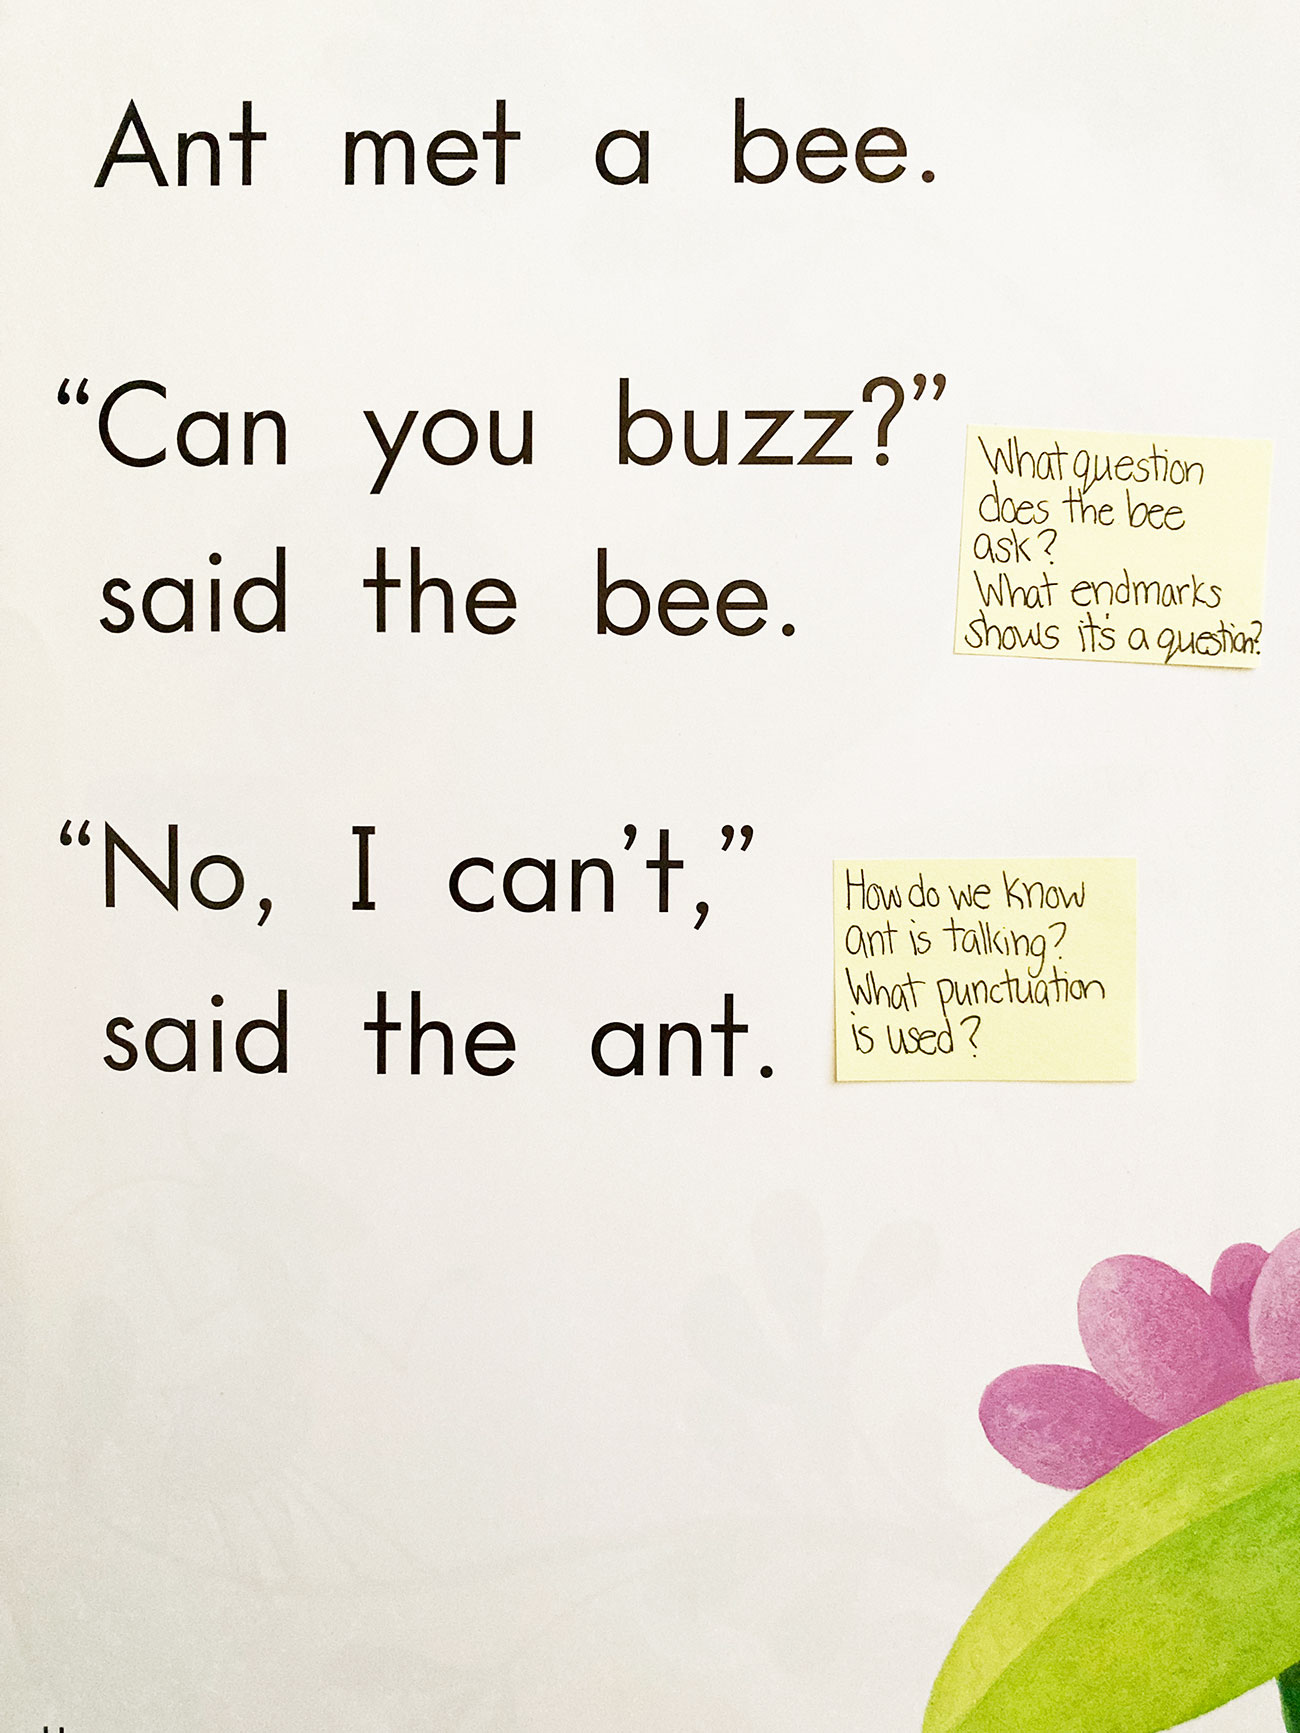 Page from predictable book showing text about a bee and an ant